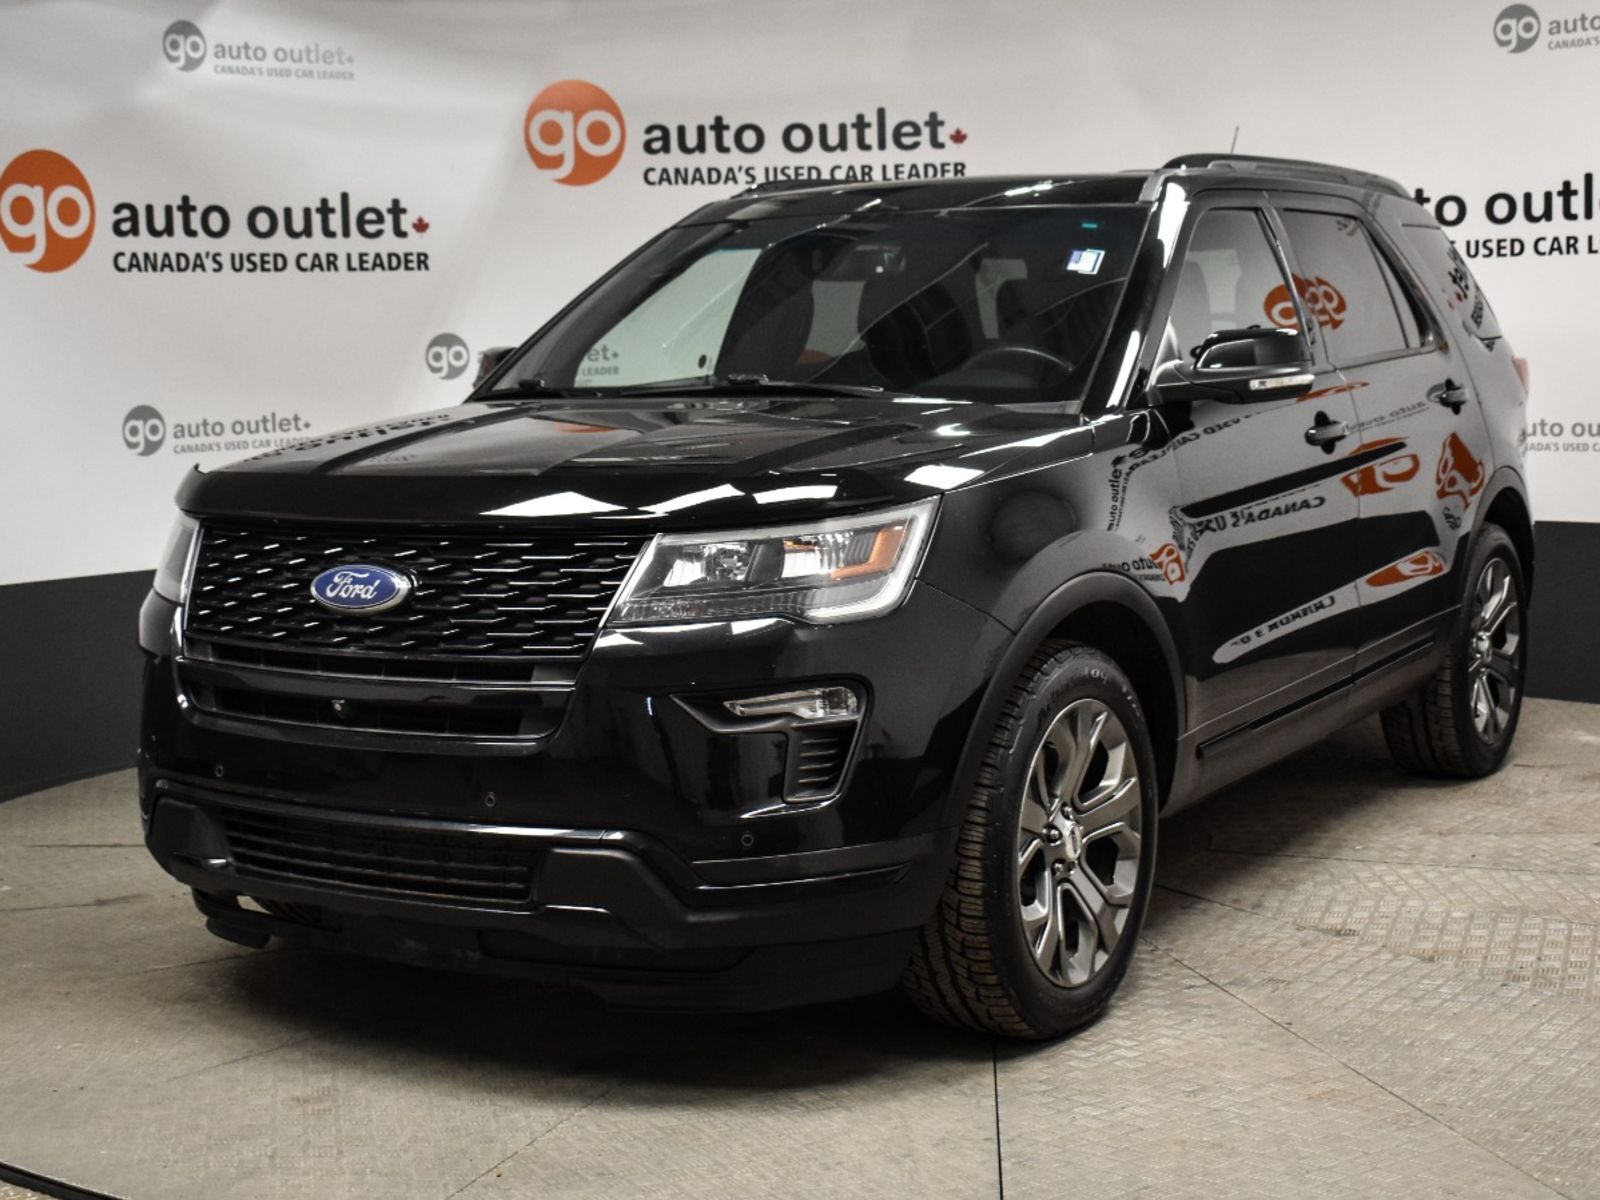 2018 Ford Explorer Sport 4WD Navi Heated Leather Seats Sunroof